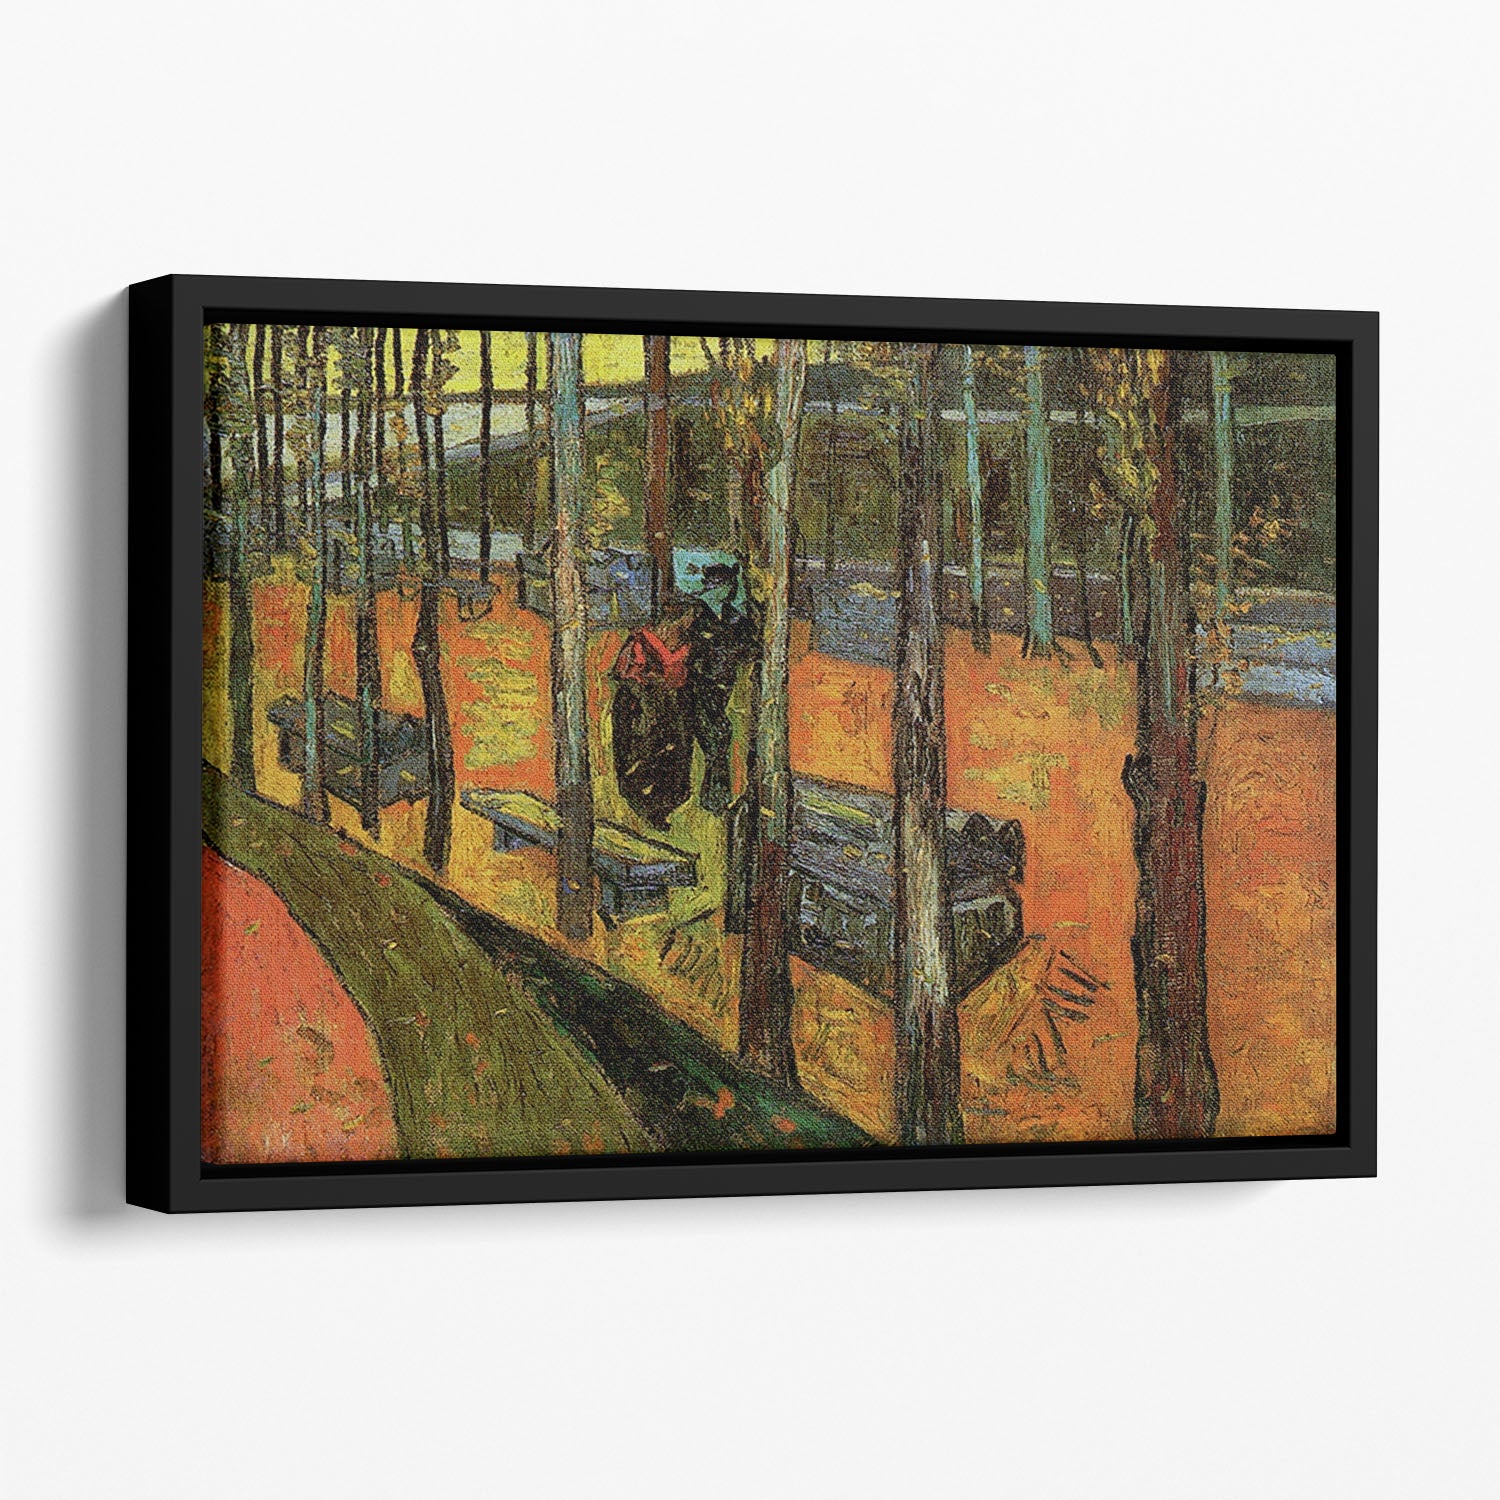 Les Alyscamps 2 by Van Gogh Floating Framed Canvas